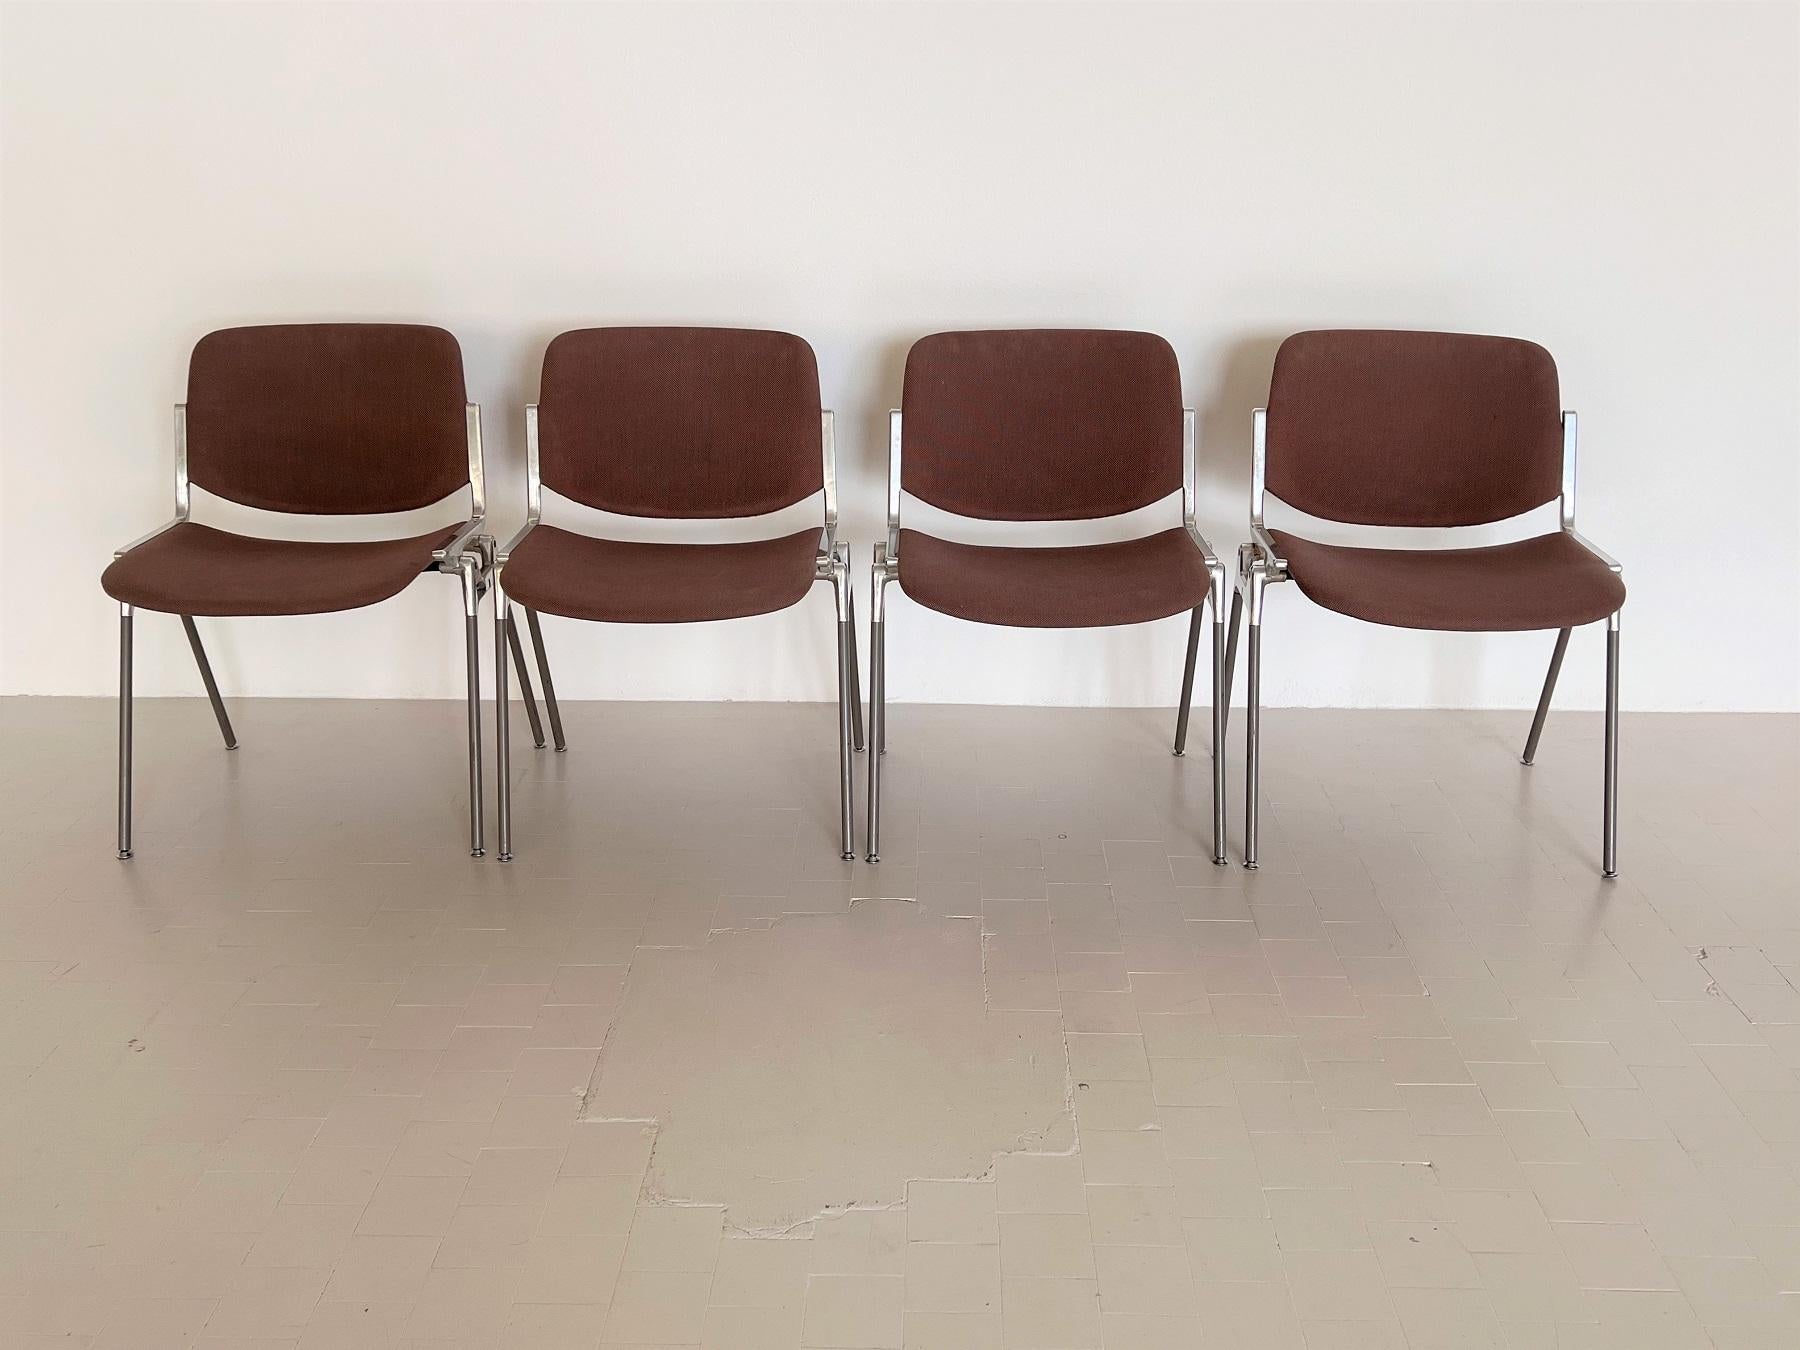 A set of four Giancarlo Piretti DSC 106 chairs in original brown upholstery.
Form and function joined in the Design of these well known stacking chairs by Giancarlo Piretti for Anonima Castelli. 
They are used as dining chairs as well as office